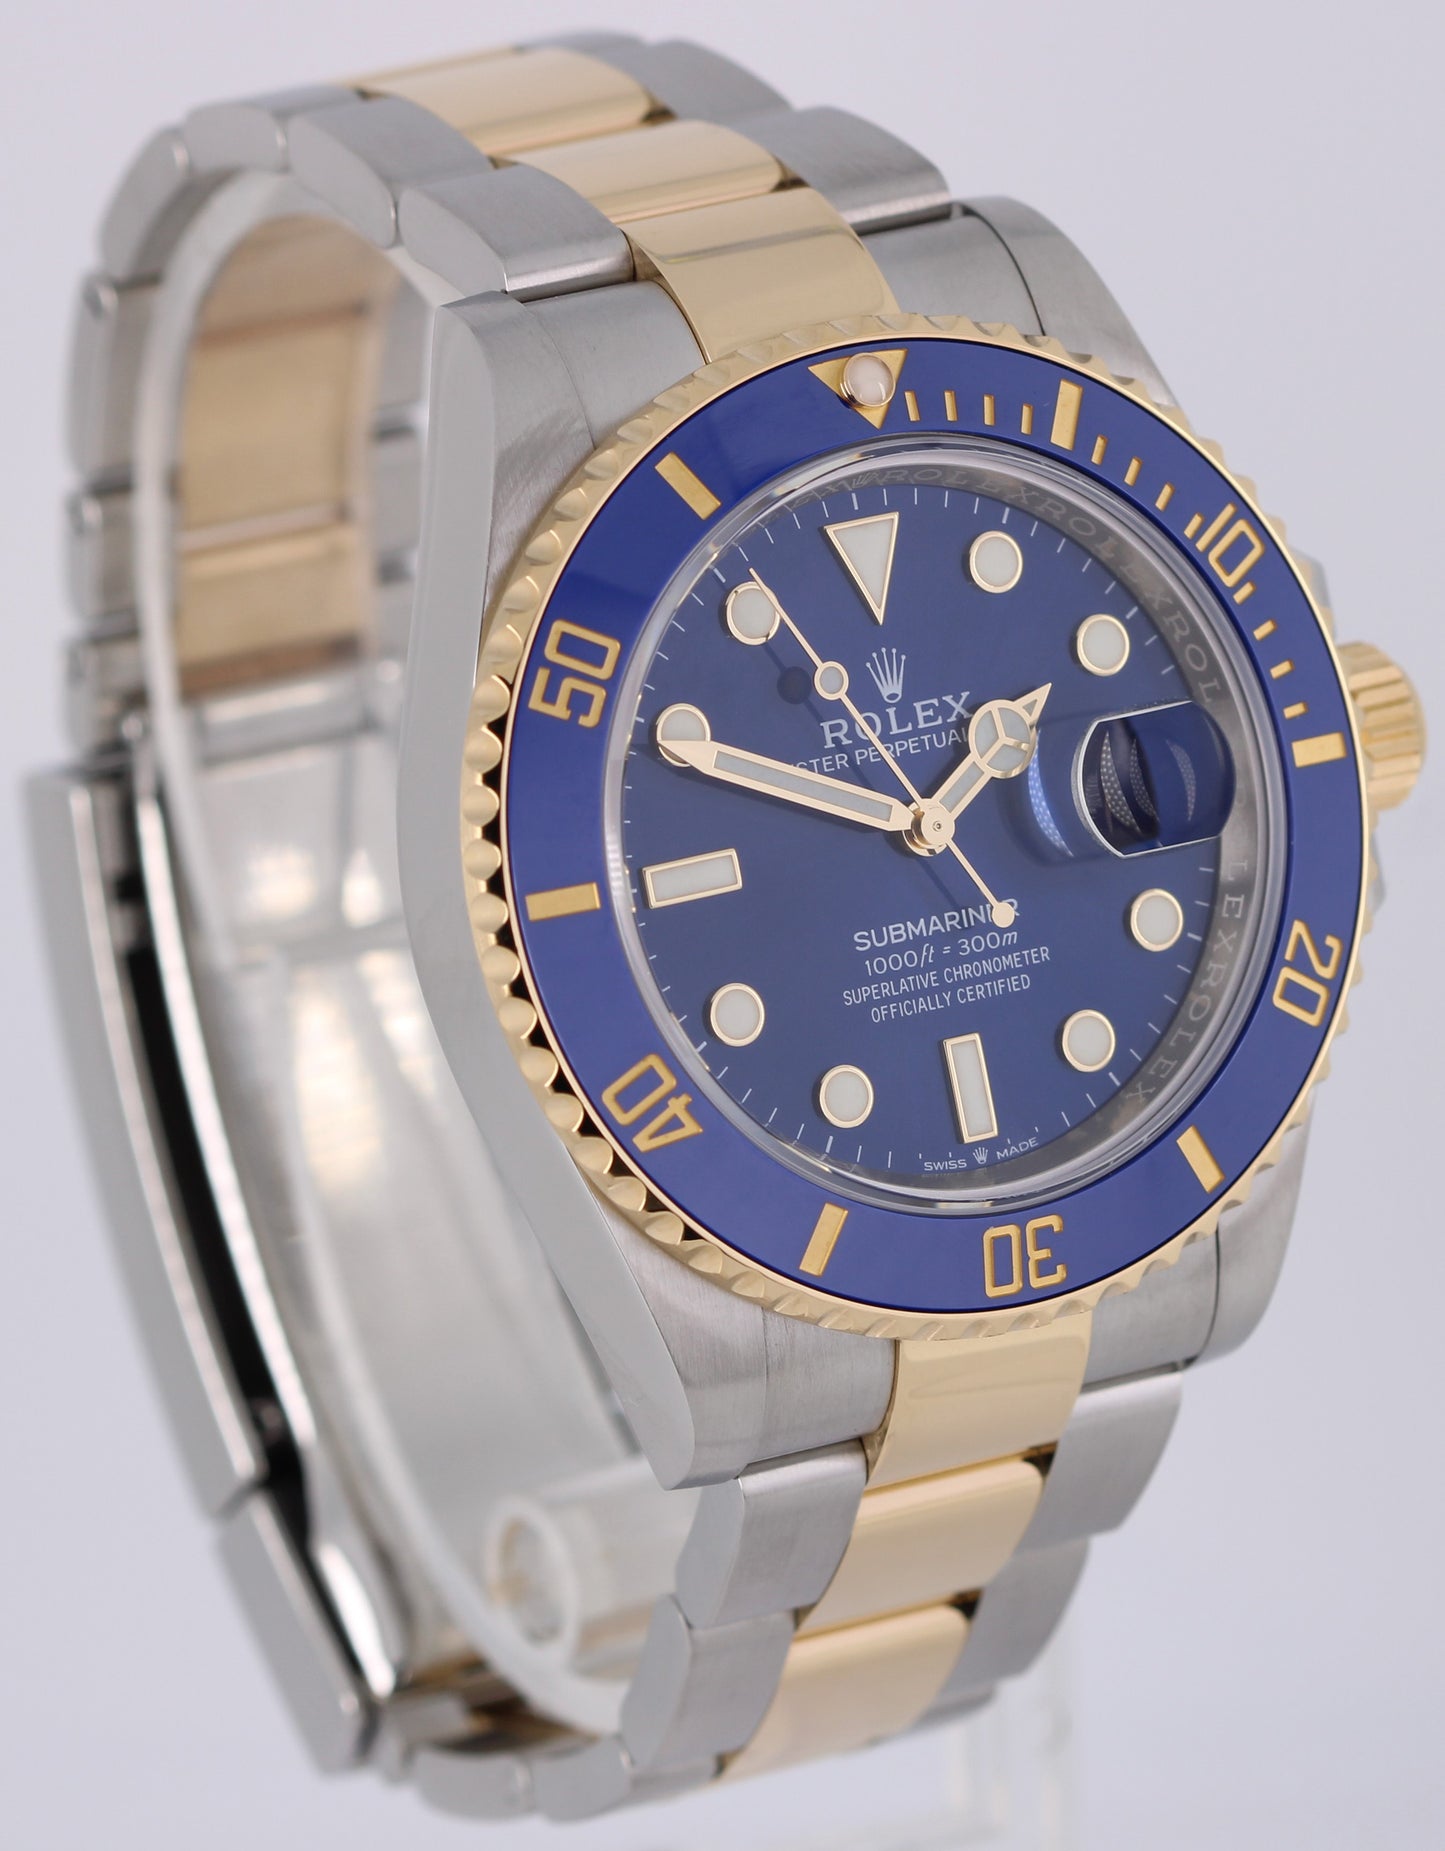 Rolex Submariner Date 41mm Two-Tone 18K Yellow Gold Steel BLUE 126613 LB Watch